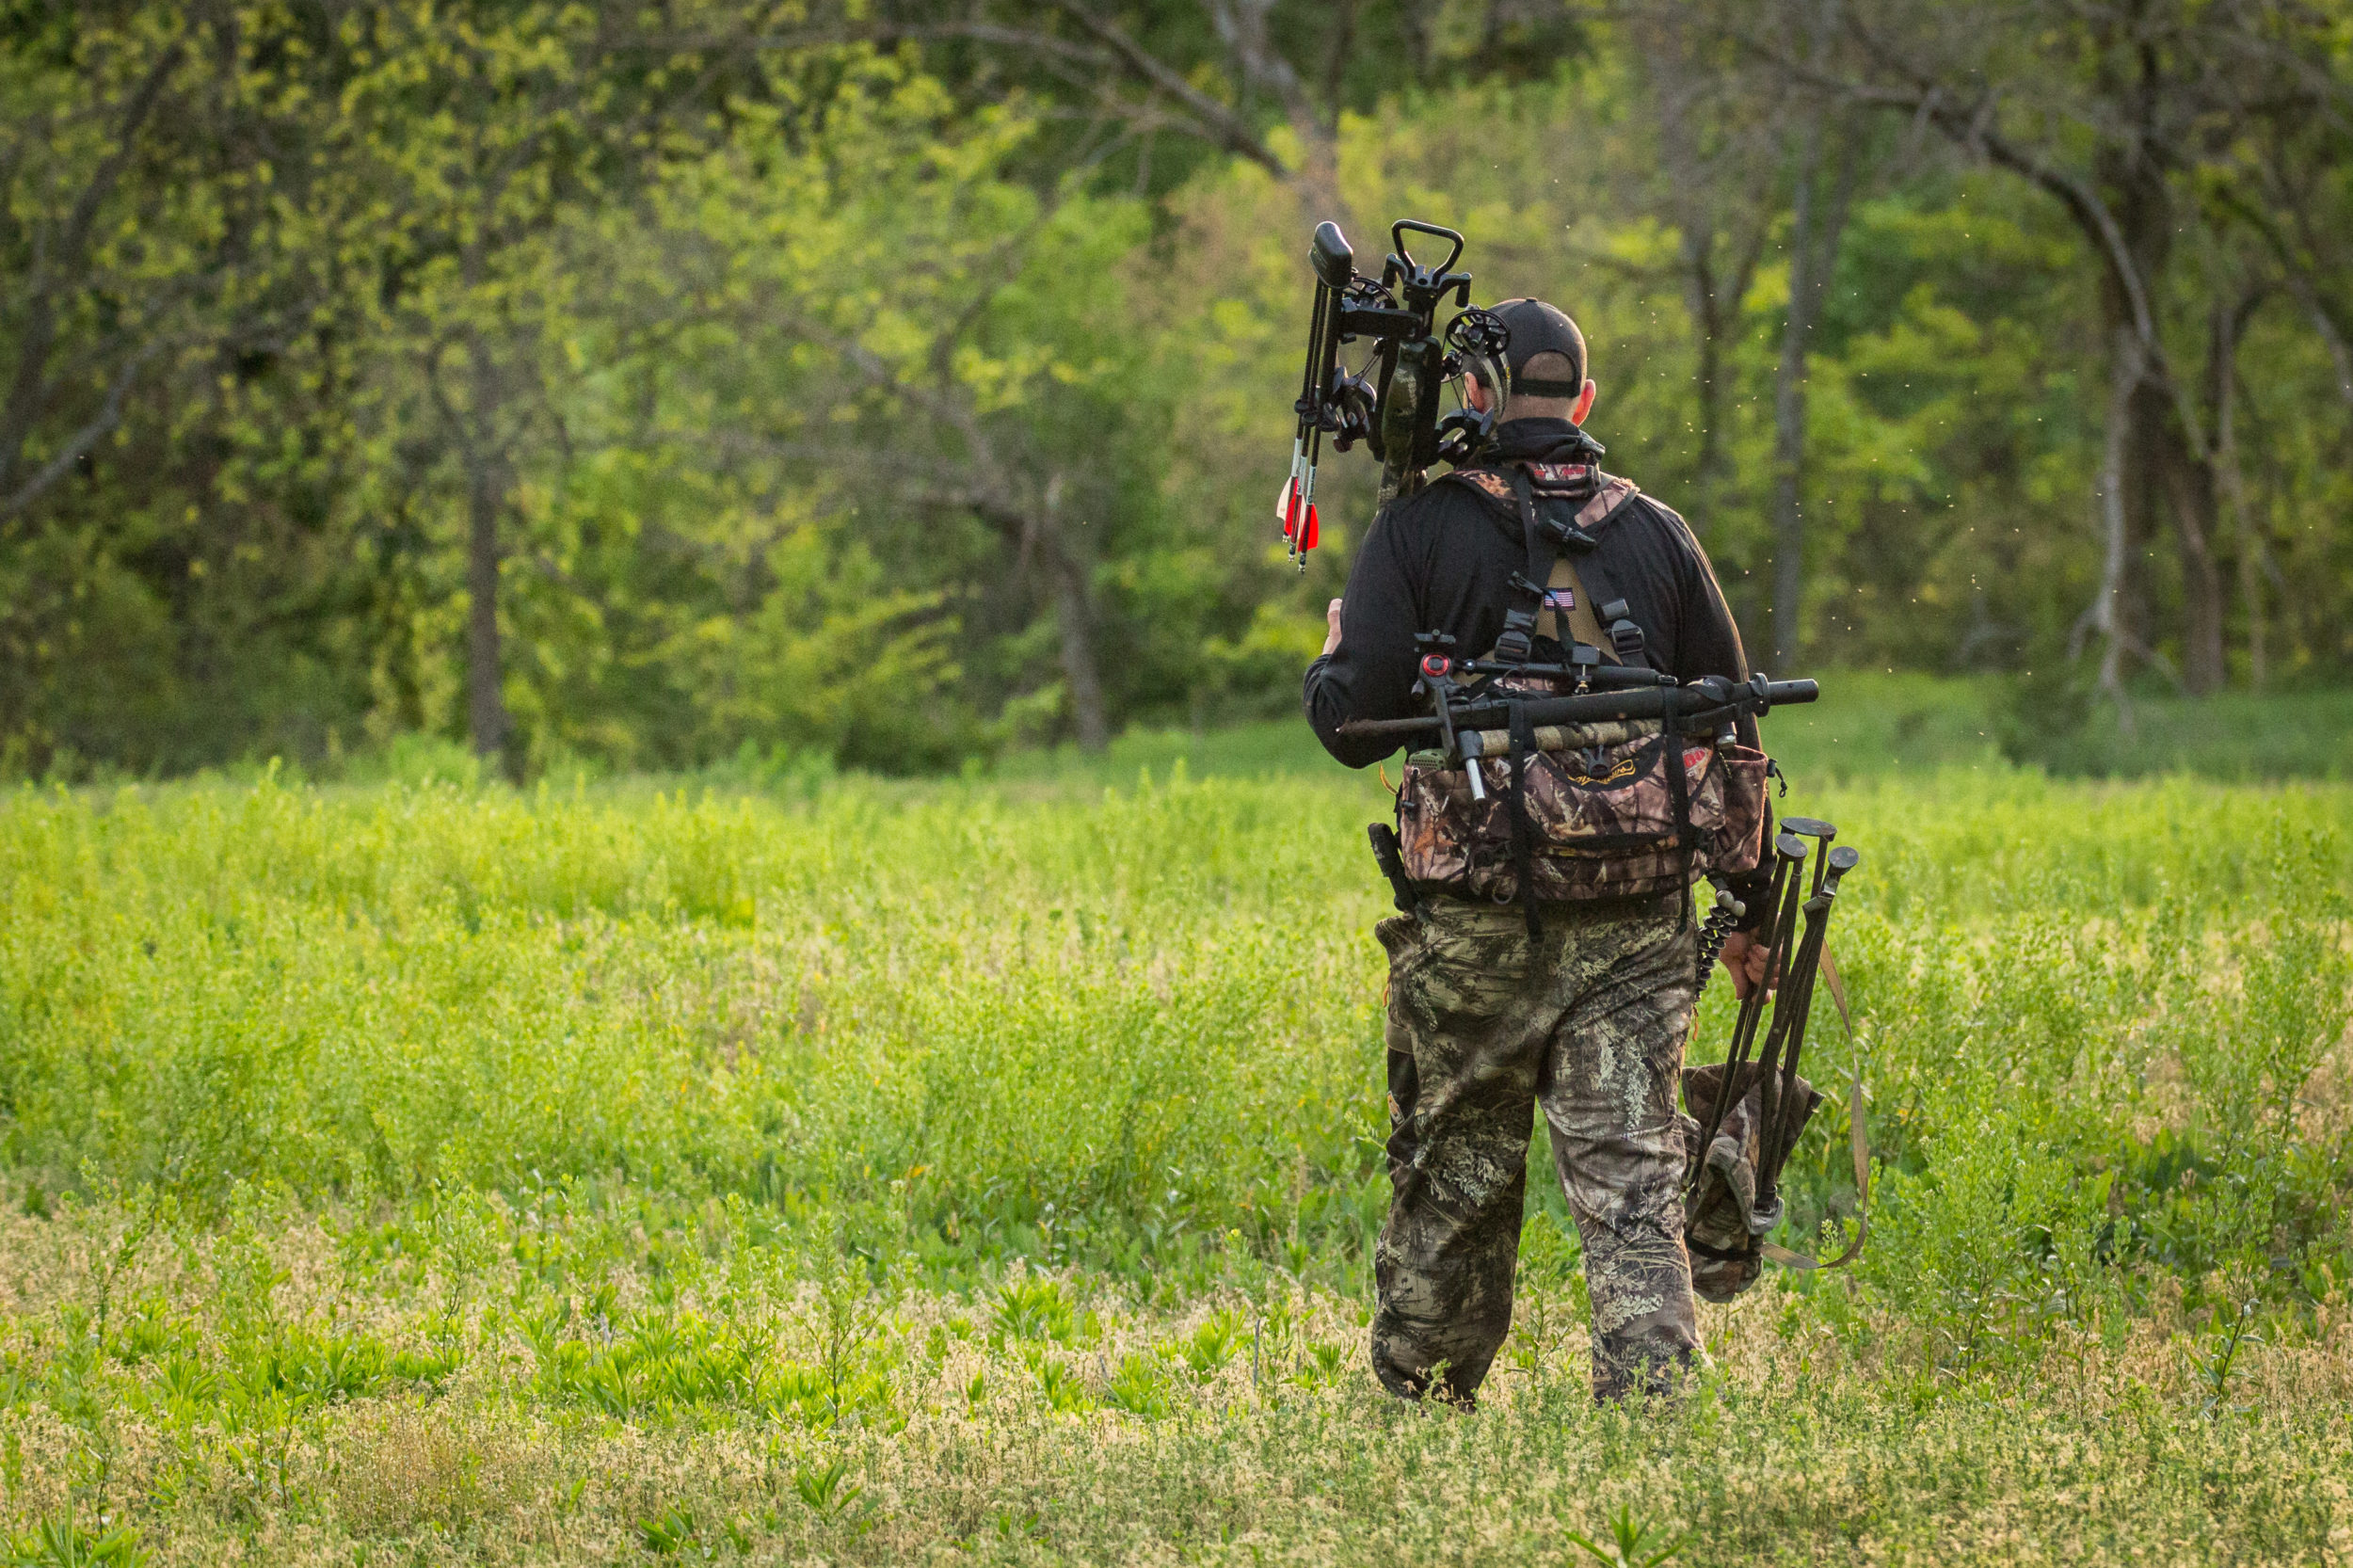 Why Crossbow Hunting Has Become So Popular